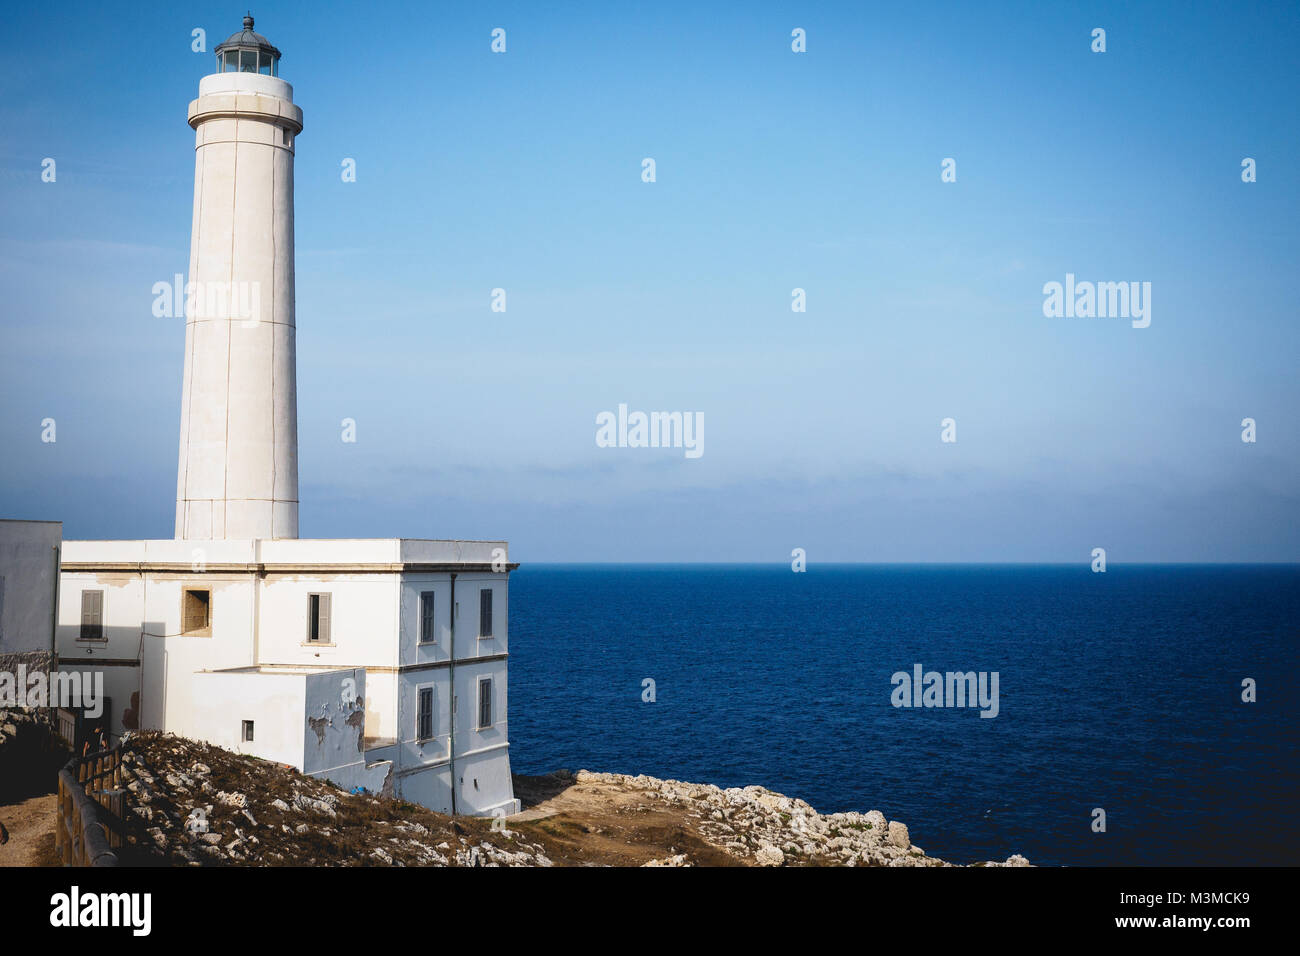 Otranto (Italy), August 2017. The lighthouse at Cape Palascia, near the Apulian town of Otranto, Italy's most easterly point. Landscape format. Stock Photo